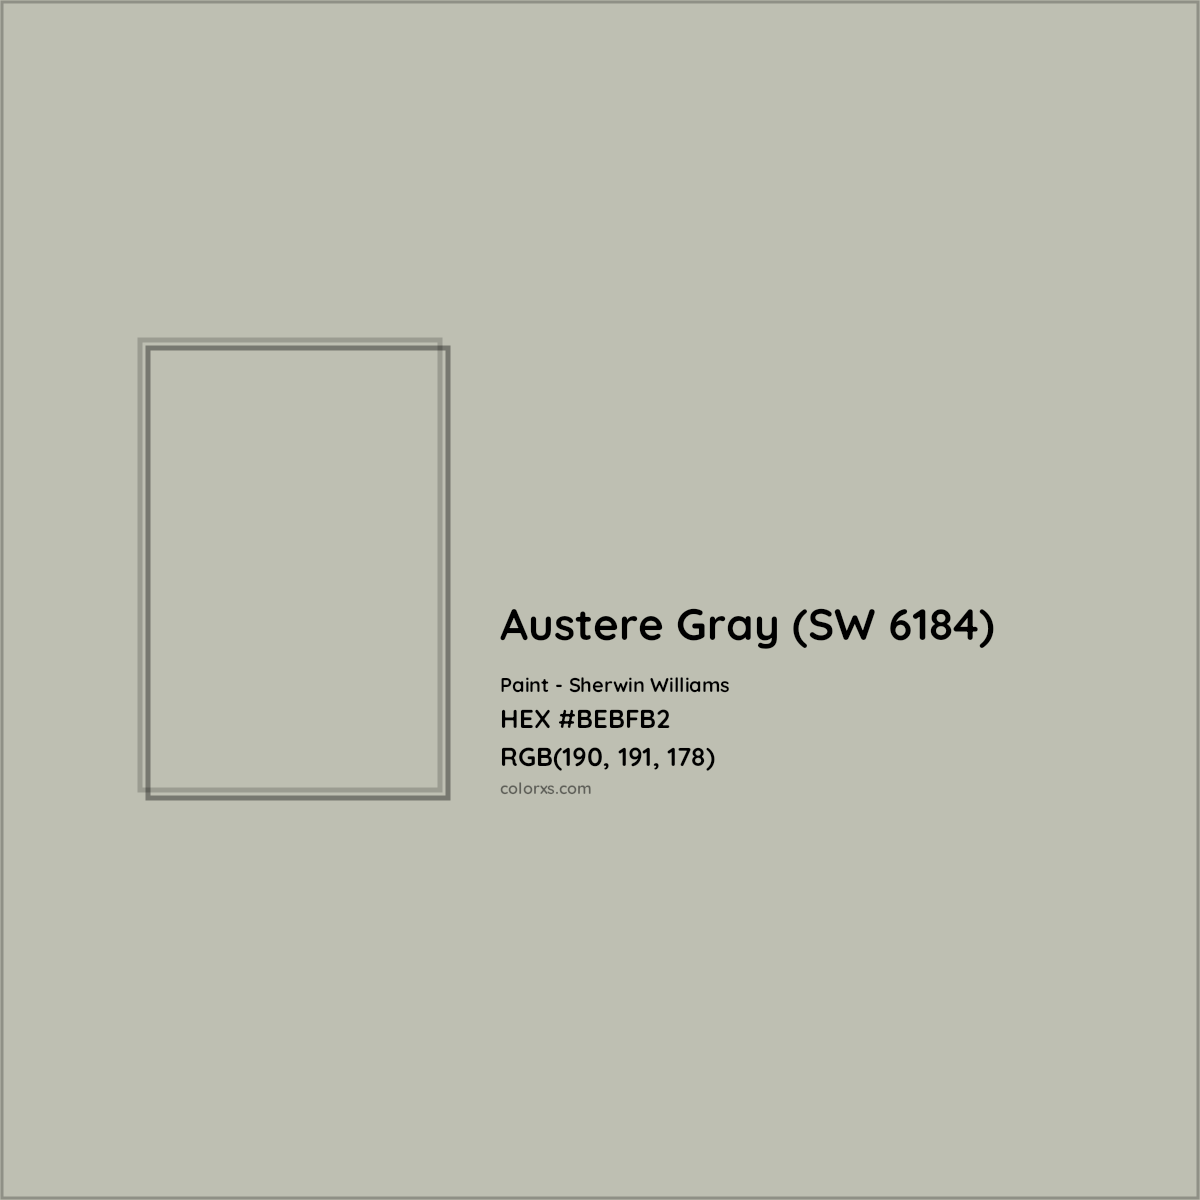 HEX #BEBFB2 Austere Gray (SW 6184) Paint Sherwin Williams - Color Code